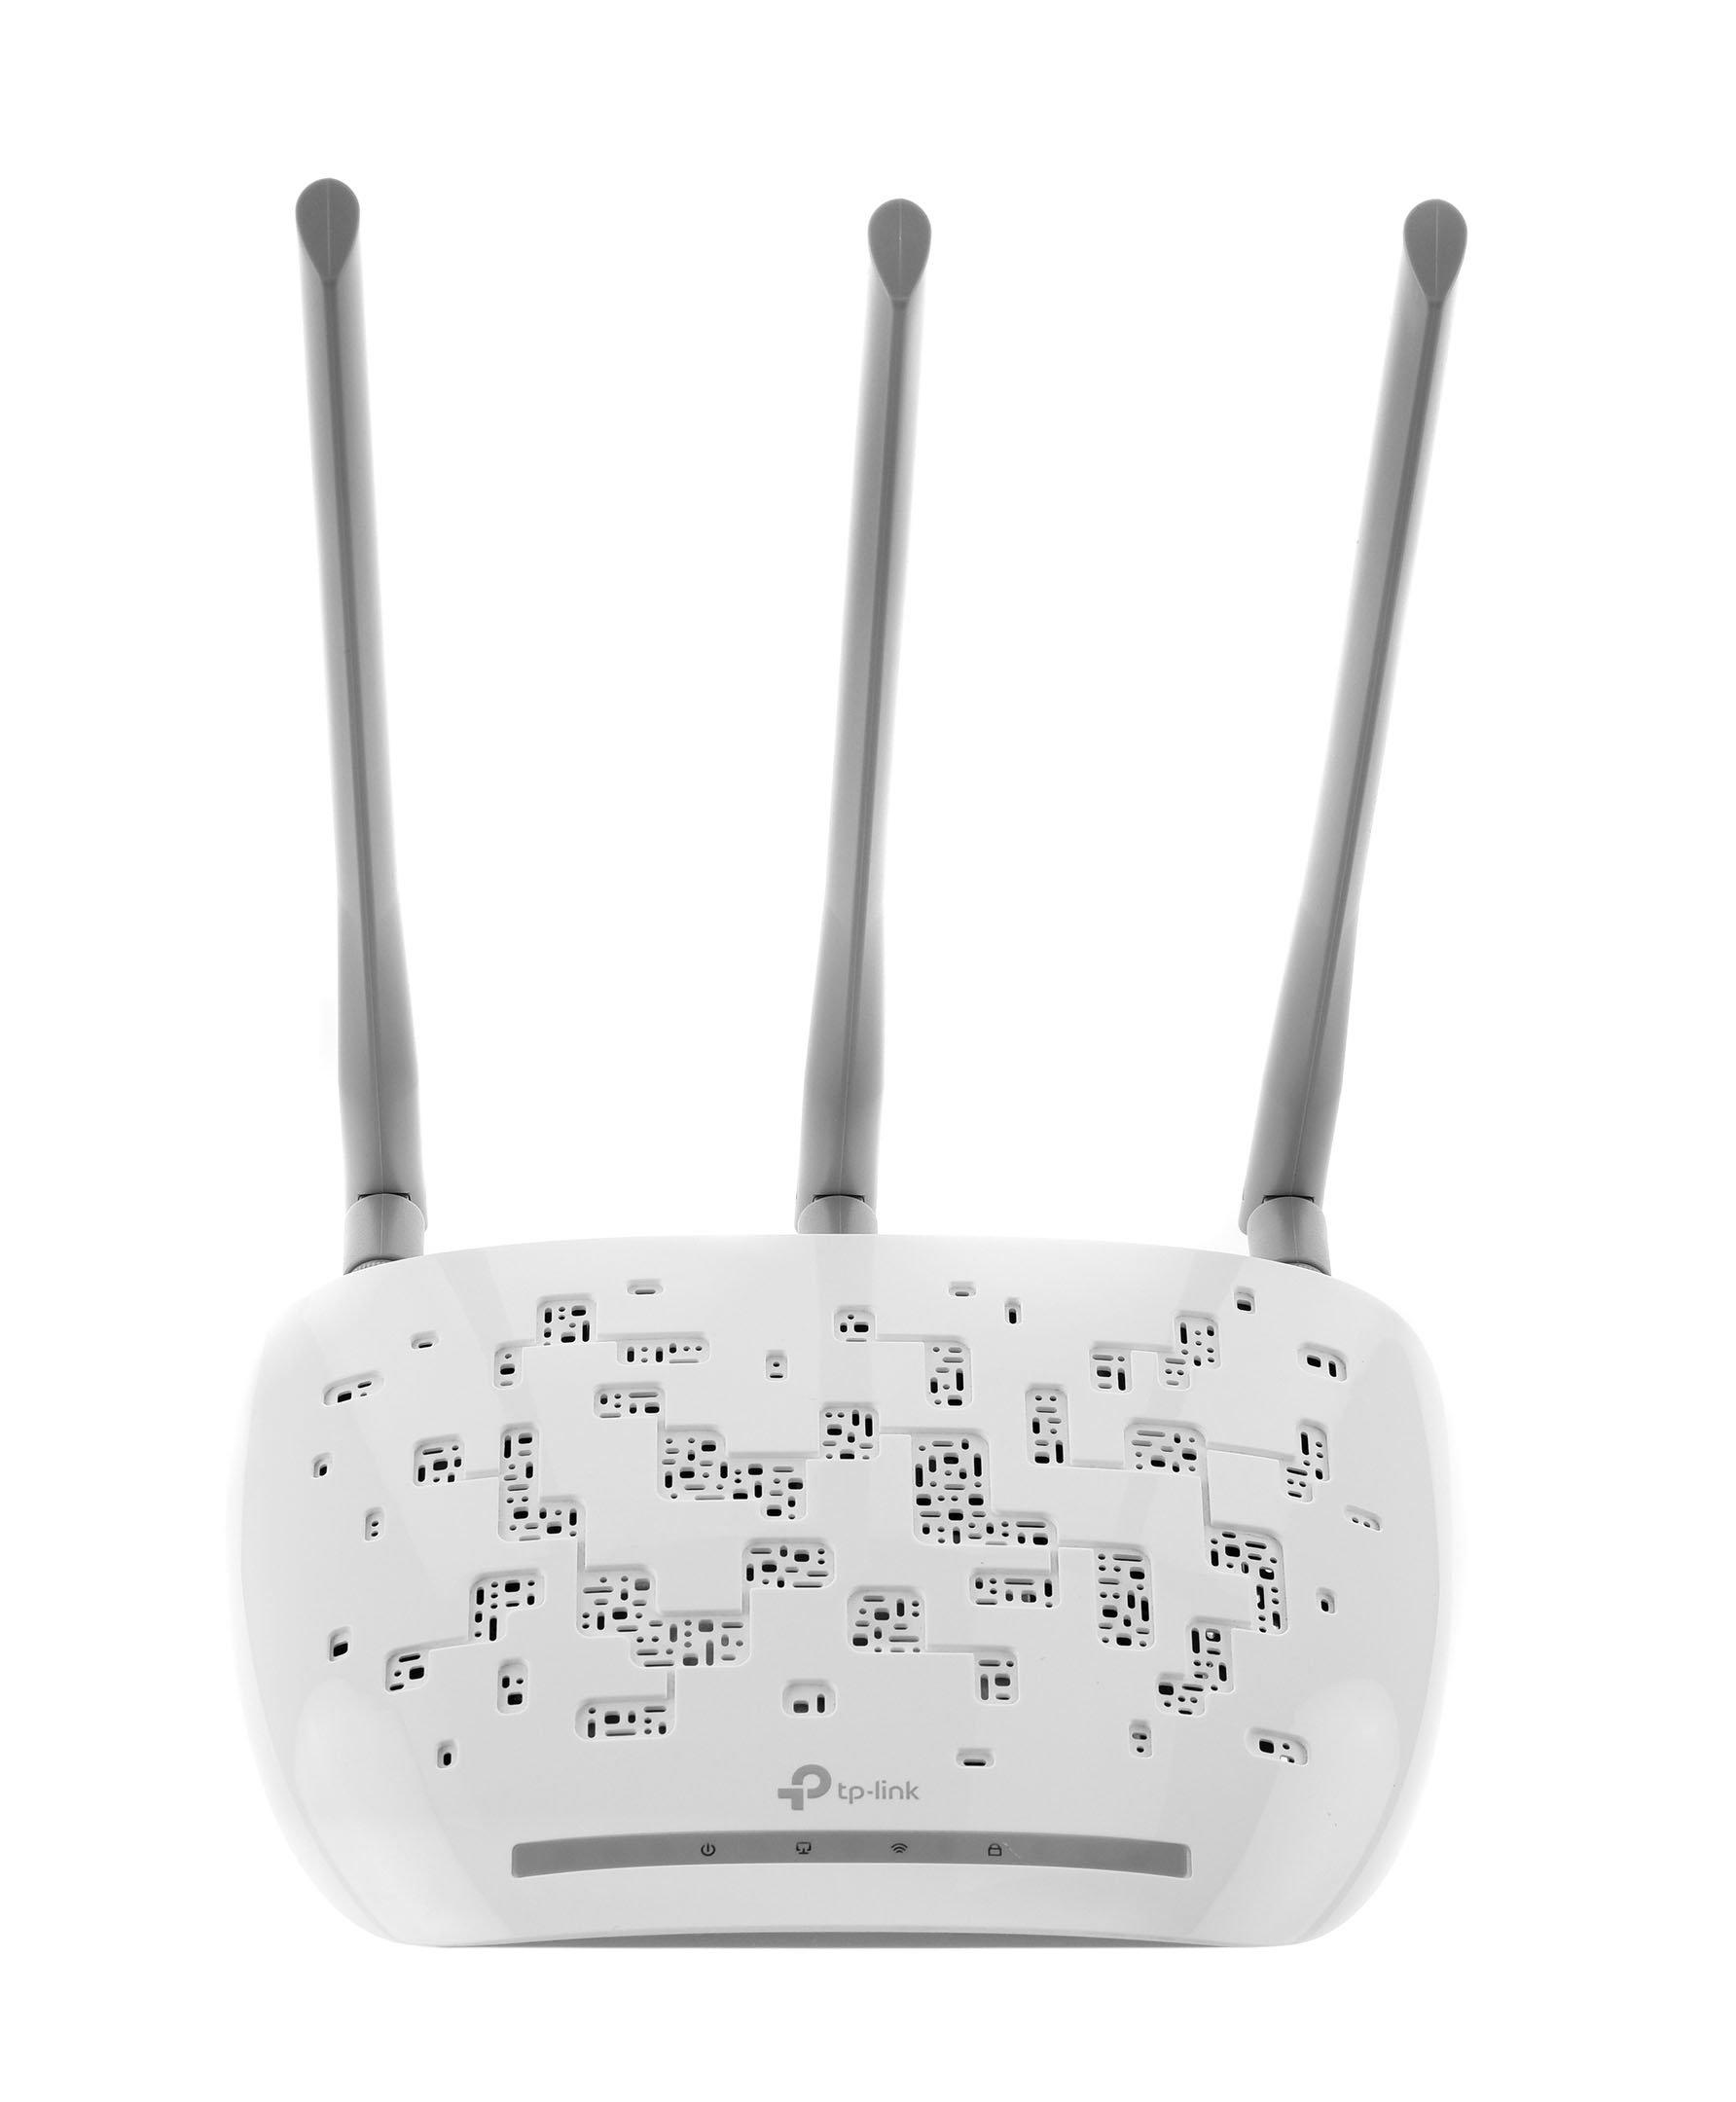 Buy 450Mbps Advanced Wireless N Access Point, Atheros, 3T3R, 2.4GHz in Saudi Arabia